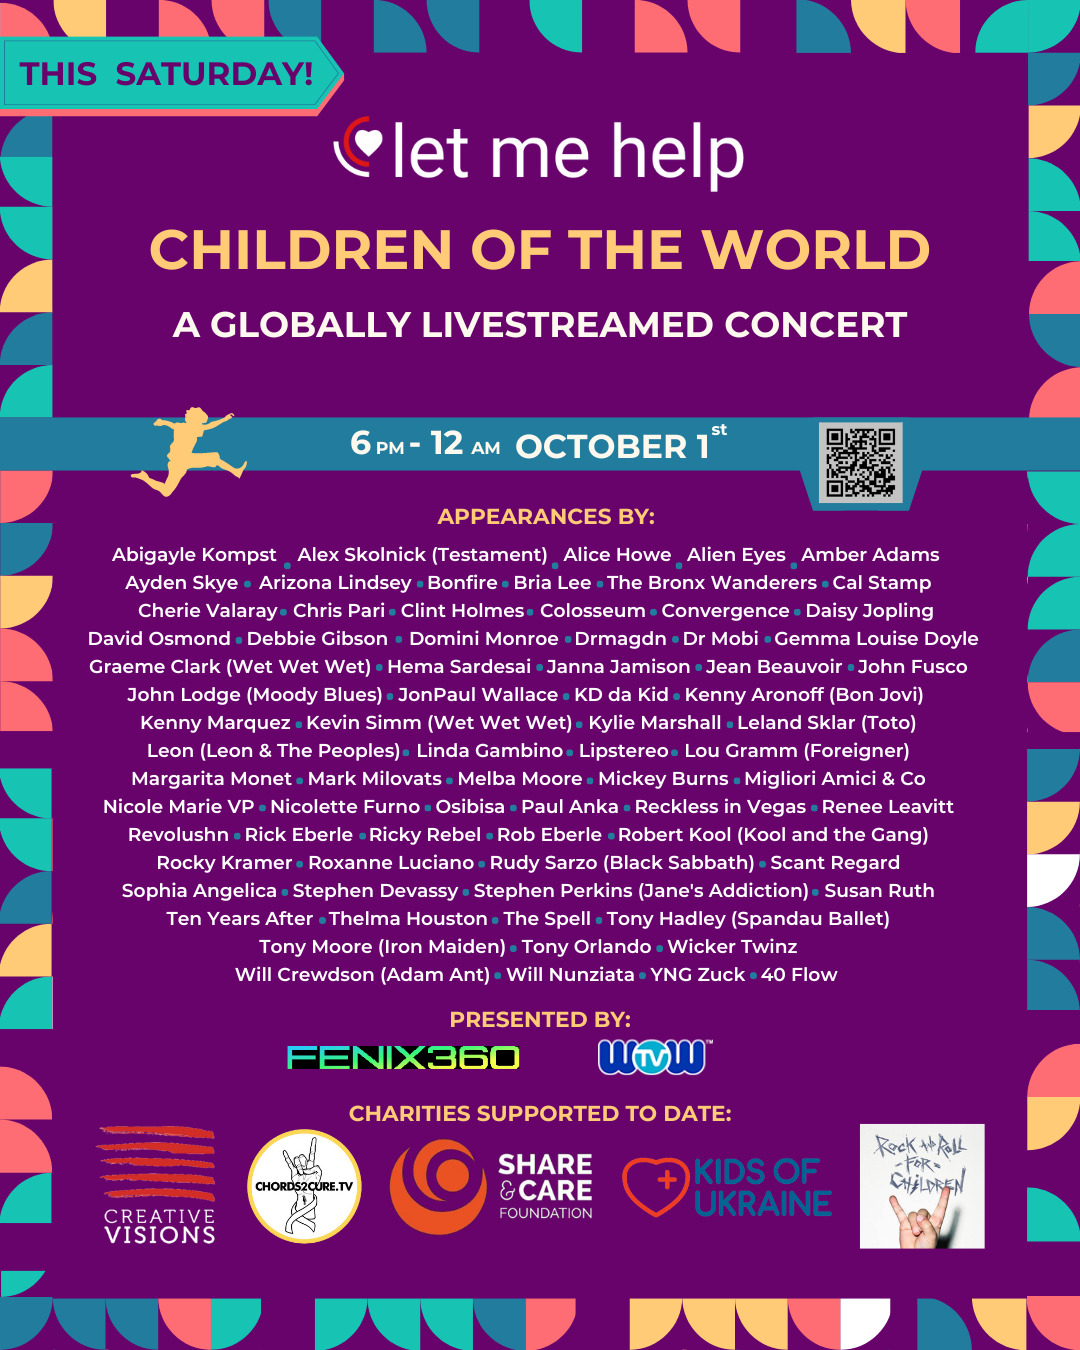 Star-Studded Let Me Help the Children of the World 6 Hour Mega Music Globally Streamed Celebration Benefit Presented by FENIX360 and WOW TV Triumphs